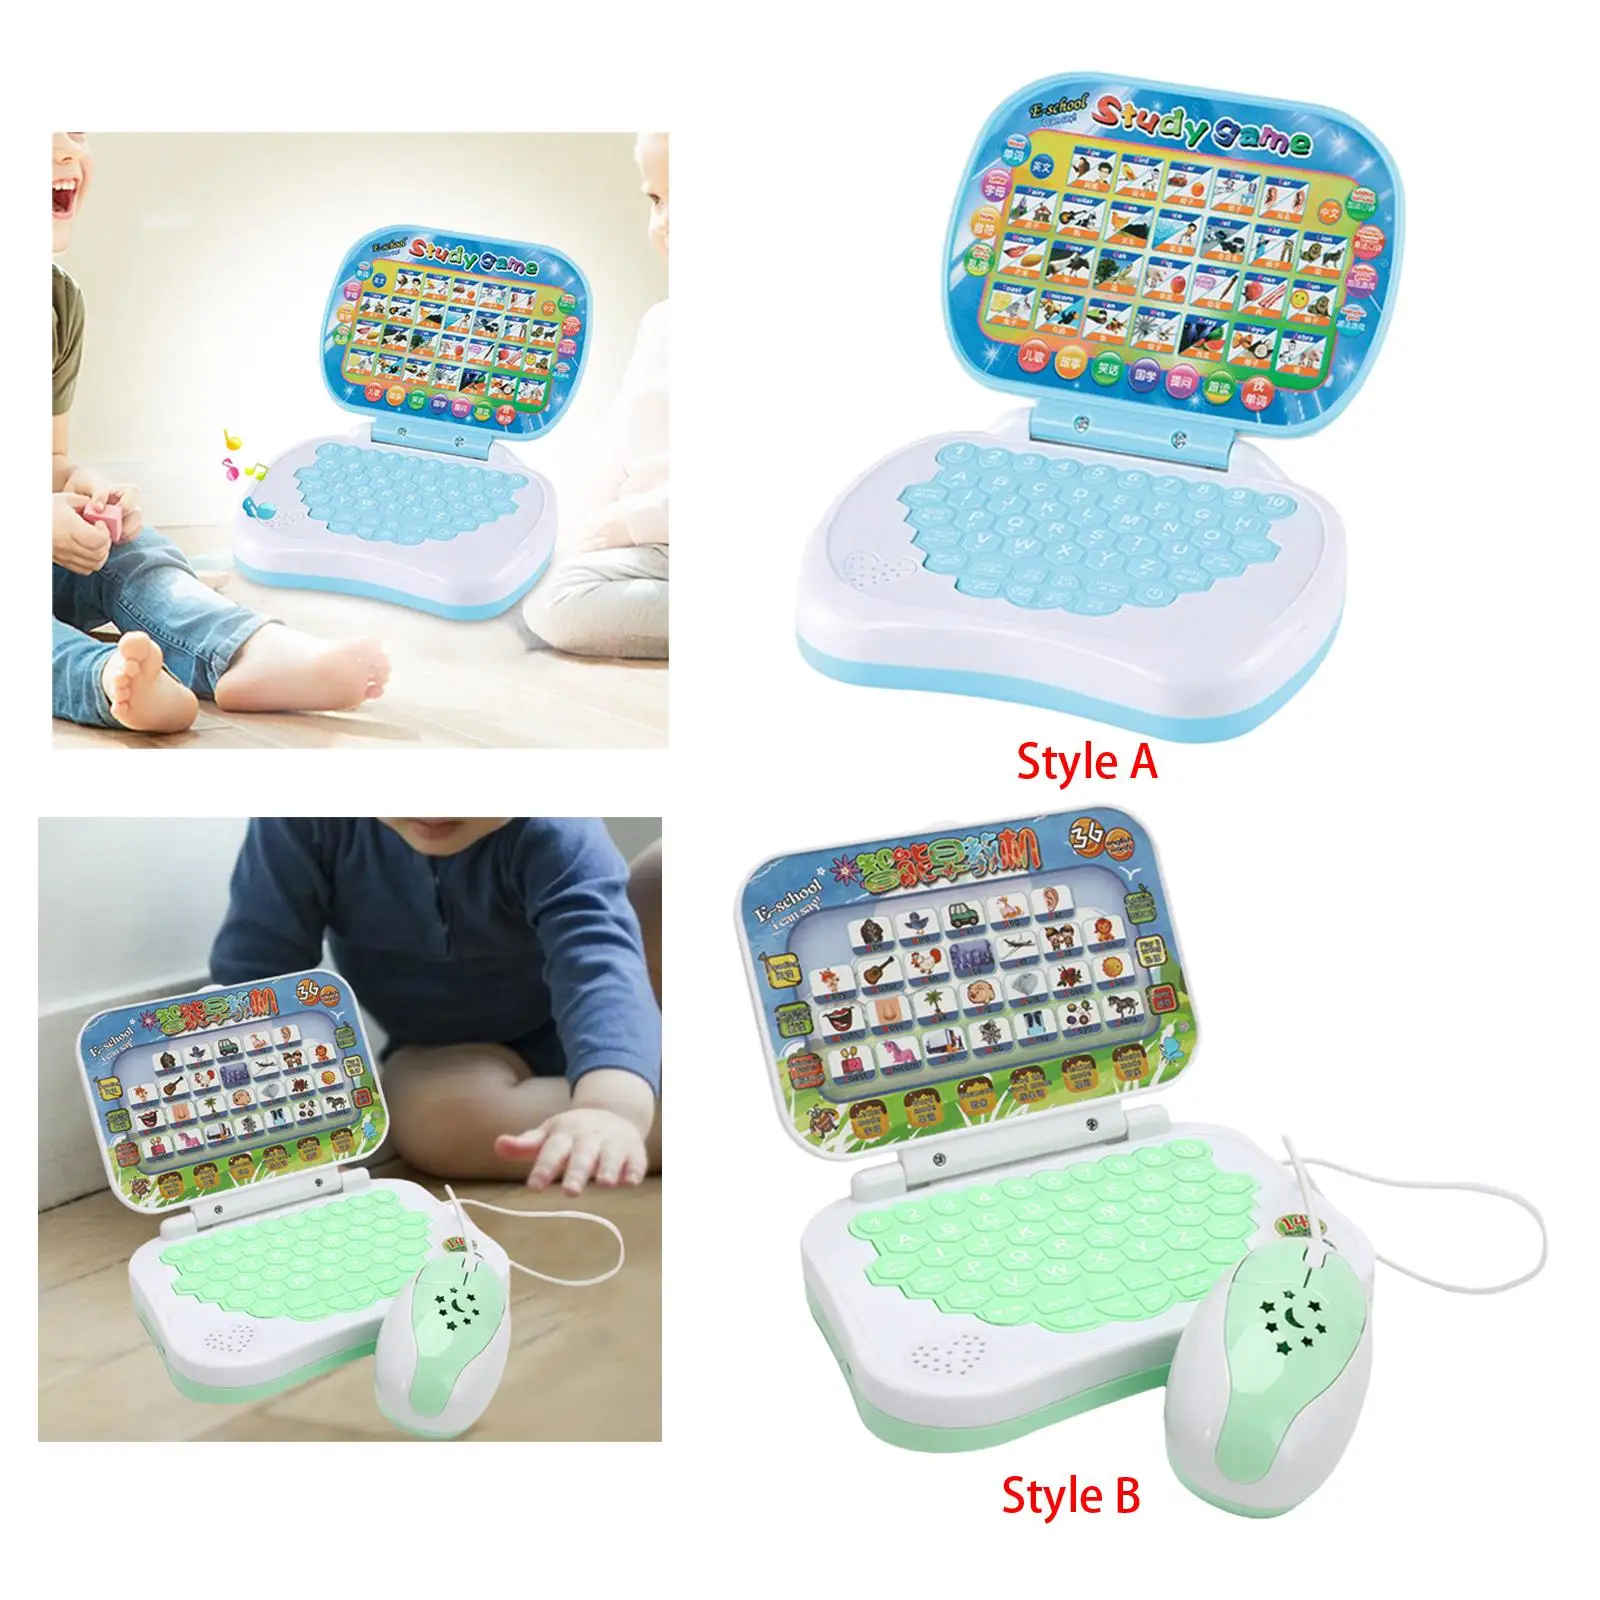 Multifunction Learning Machine English Early Education Toy Child Interactive Learning Pad Tablet for Toddler Kids Bithday Gifts